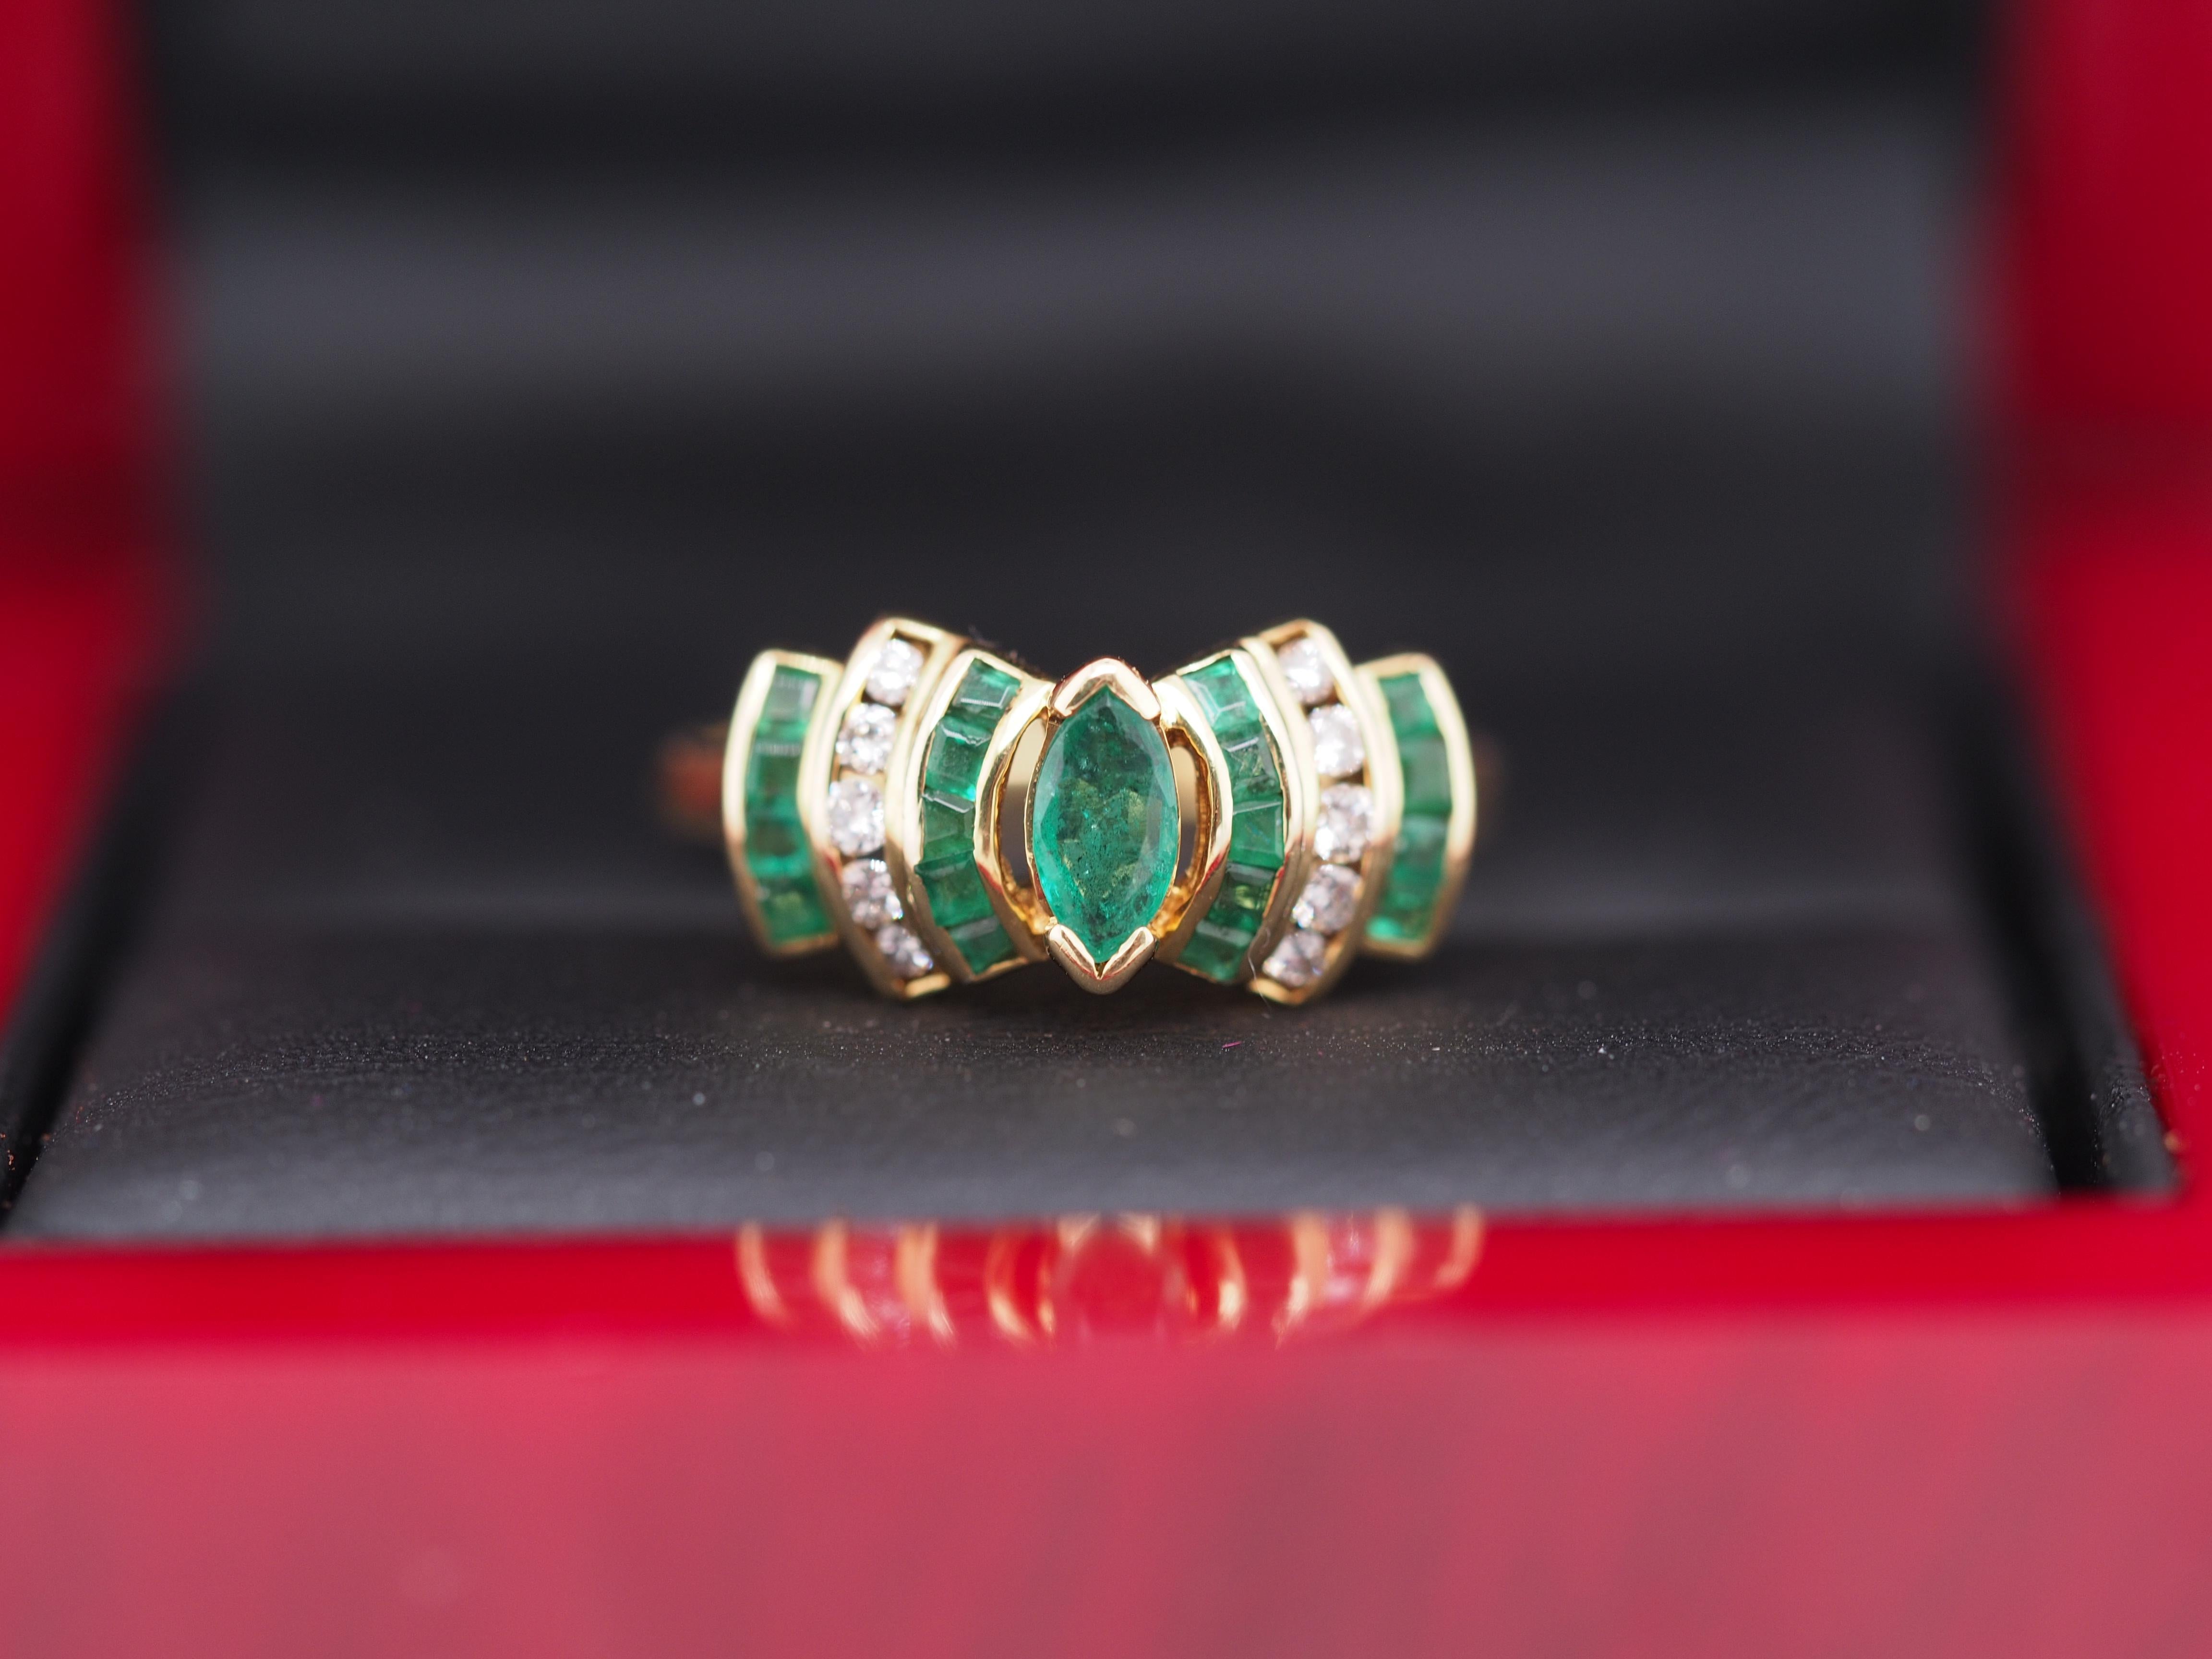 Year: 1990
Item Details: LEVIAN Designer
Ring Size: 6
Metal Type: 18K Yellow Gold [Hallmarked, and Tested]
Weight: 2.5 grams
Diamond Details
Emerald: Natural Emeralds 1.00cttw Square & Marquise Cut
Side Diamonds: Natural Round Diamonds .25cttw